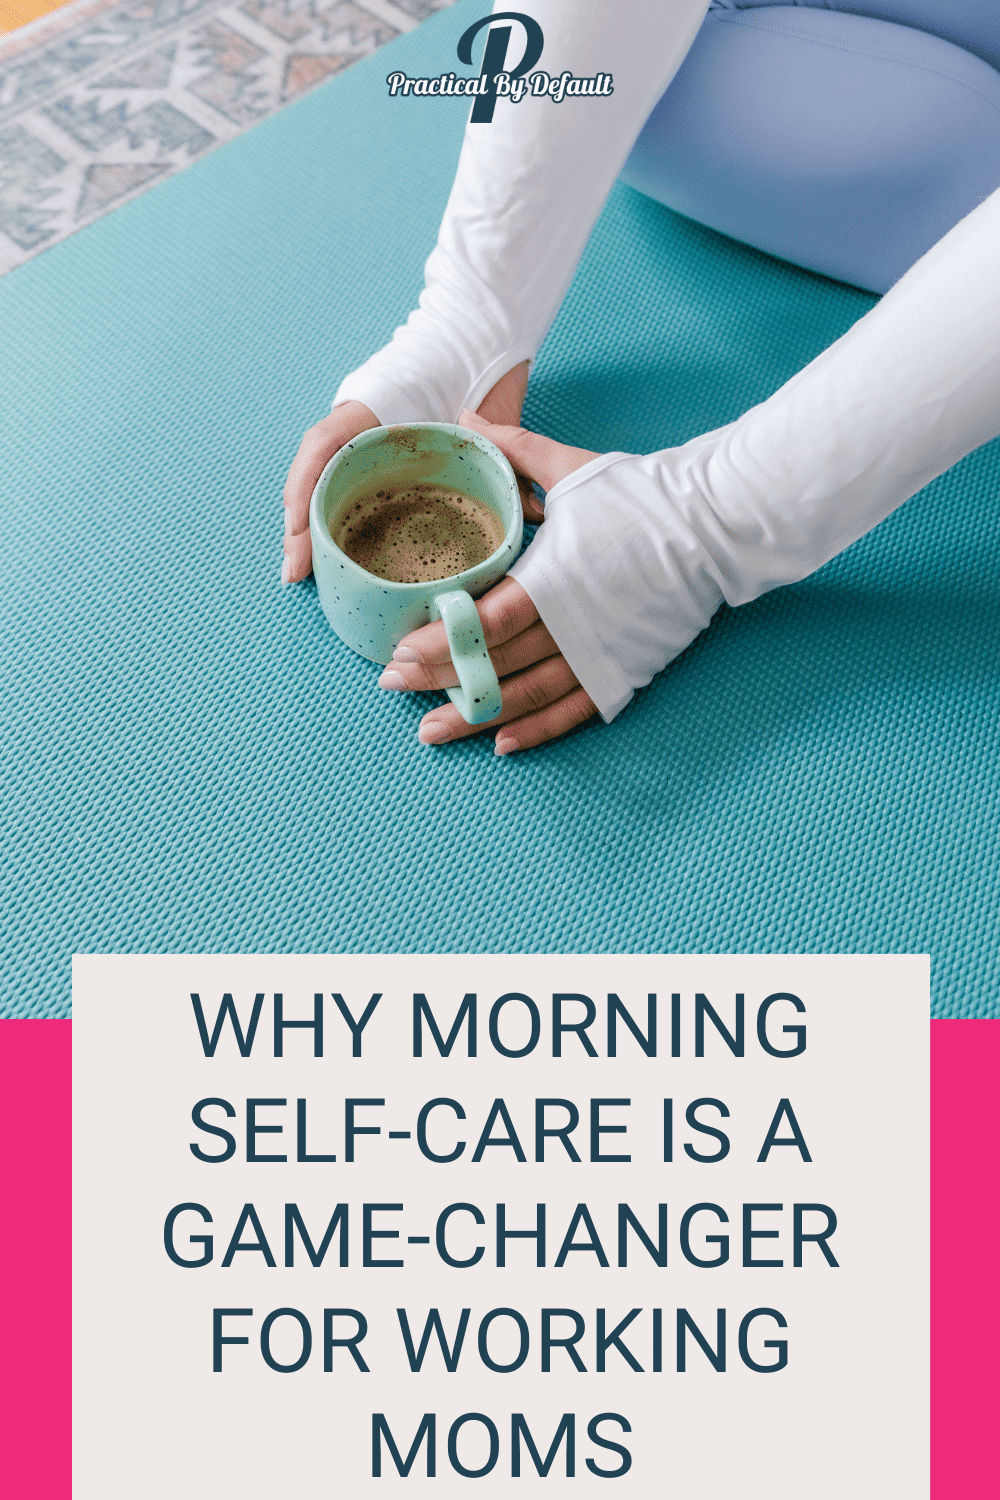 Morning Routine: Practice Self-Care in the Morning